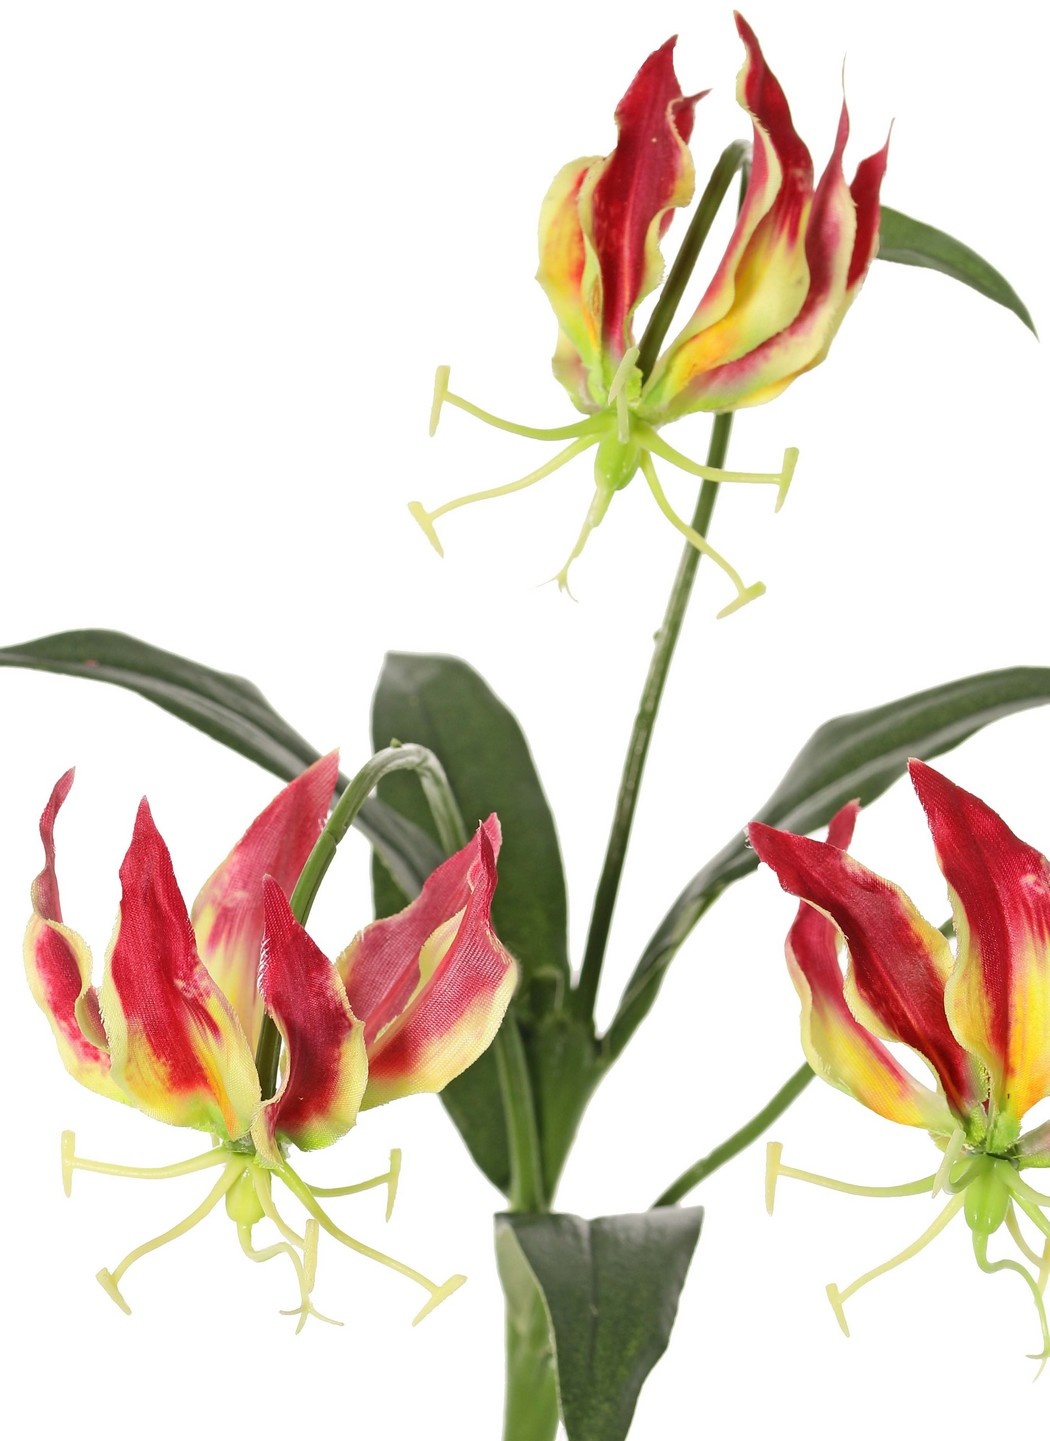 Lily gloriosa (climbing lily) 'mini', with 3 polyester flowers & 4 leaves, 50 cm